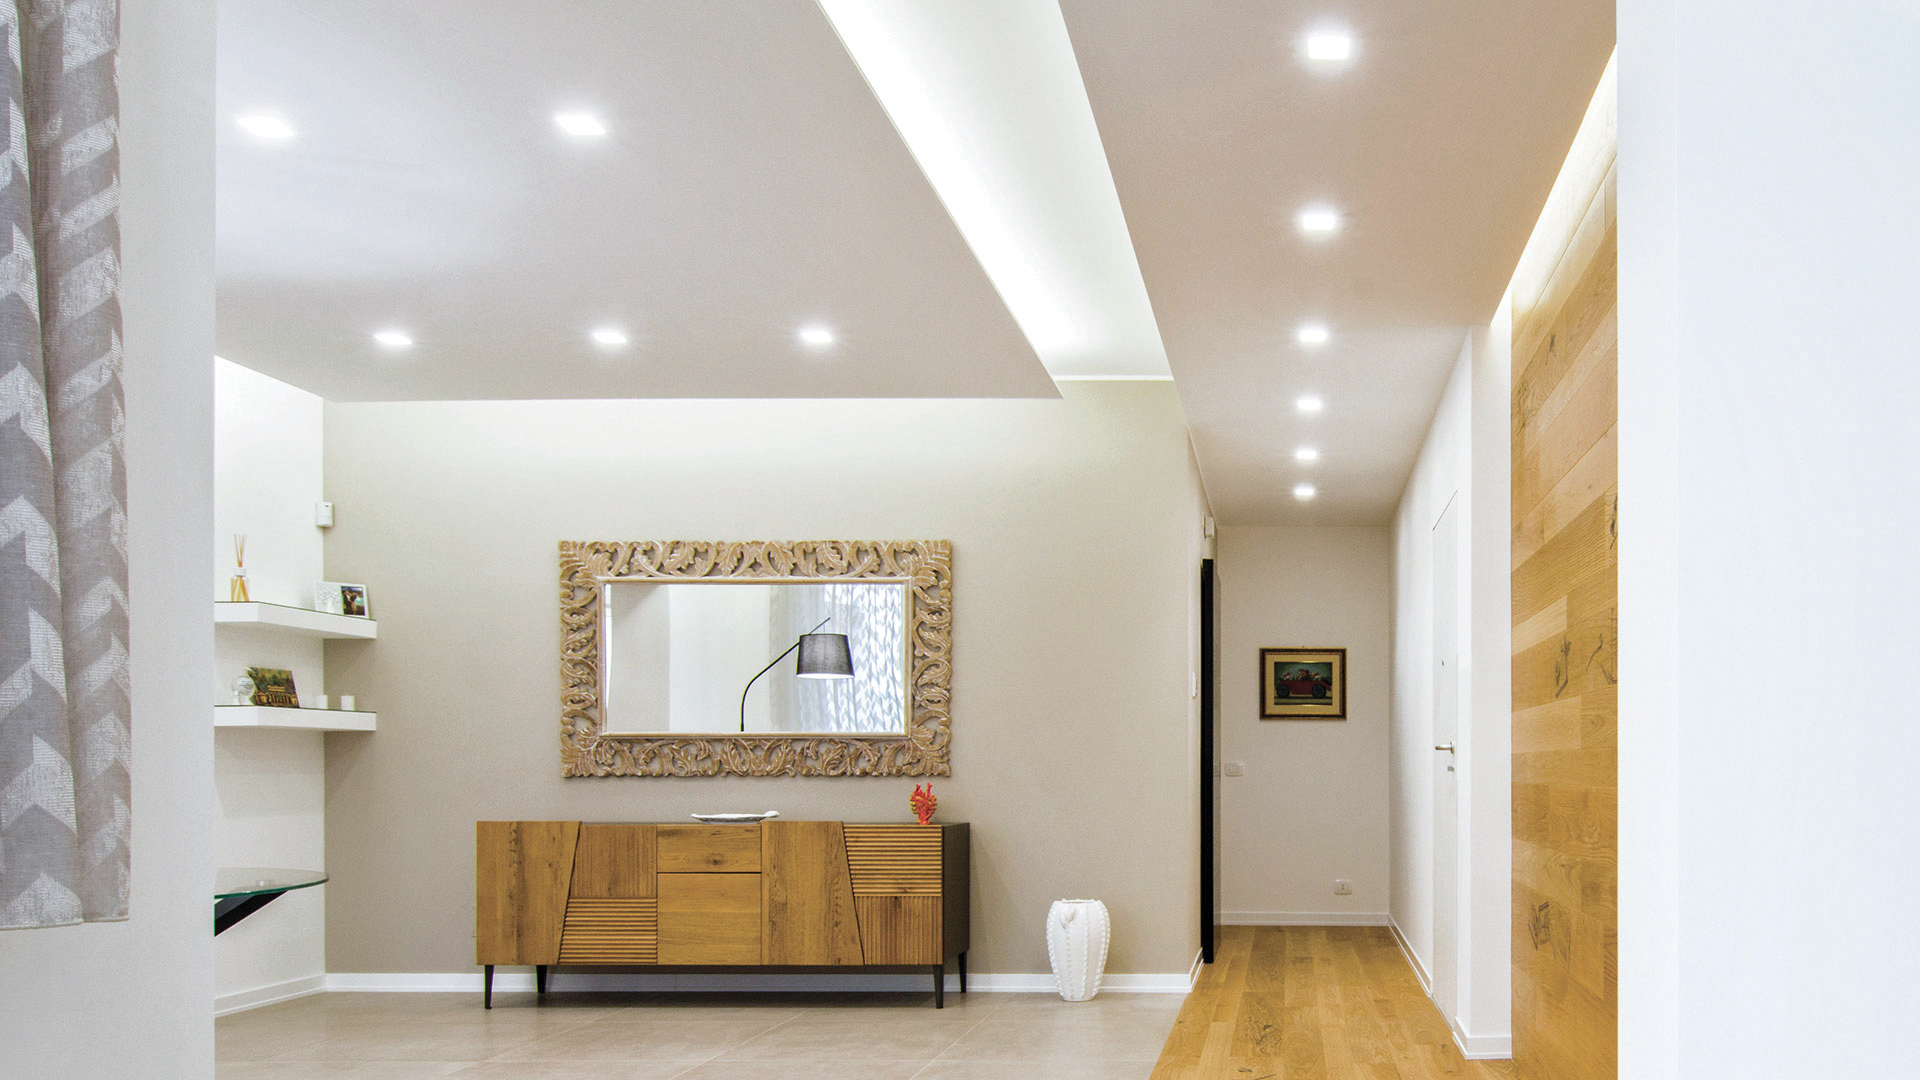 How to light up plasterboard ceilings? Some ideas